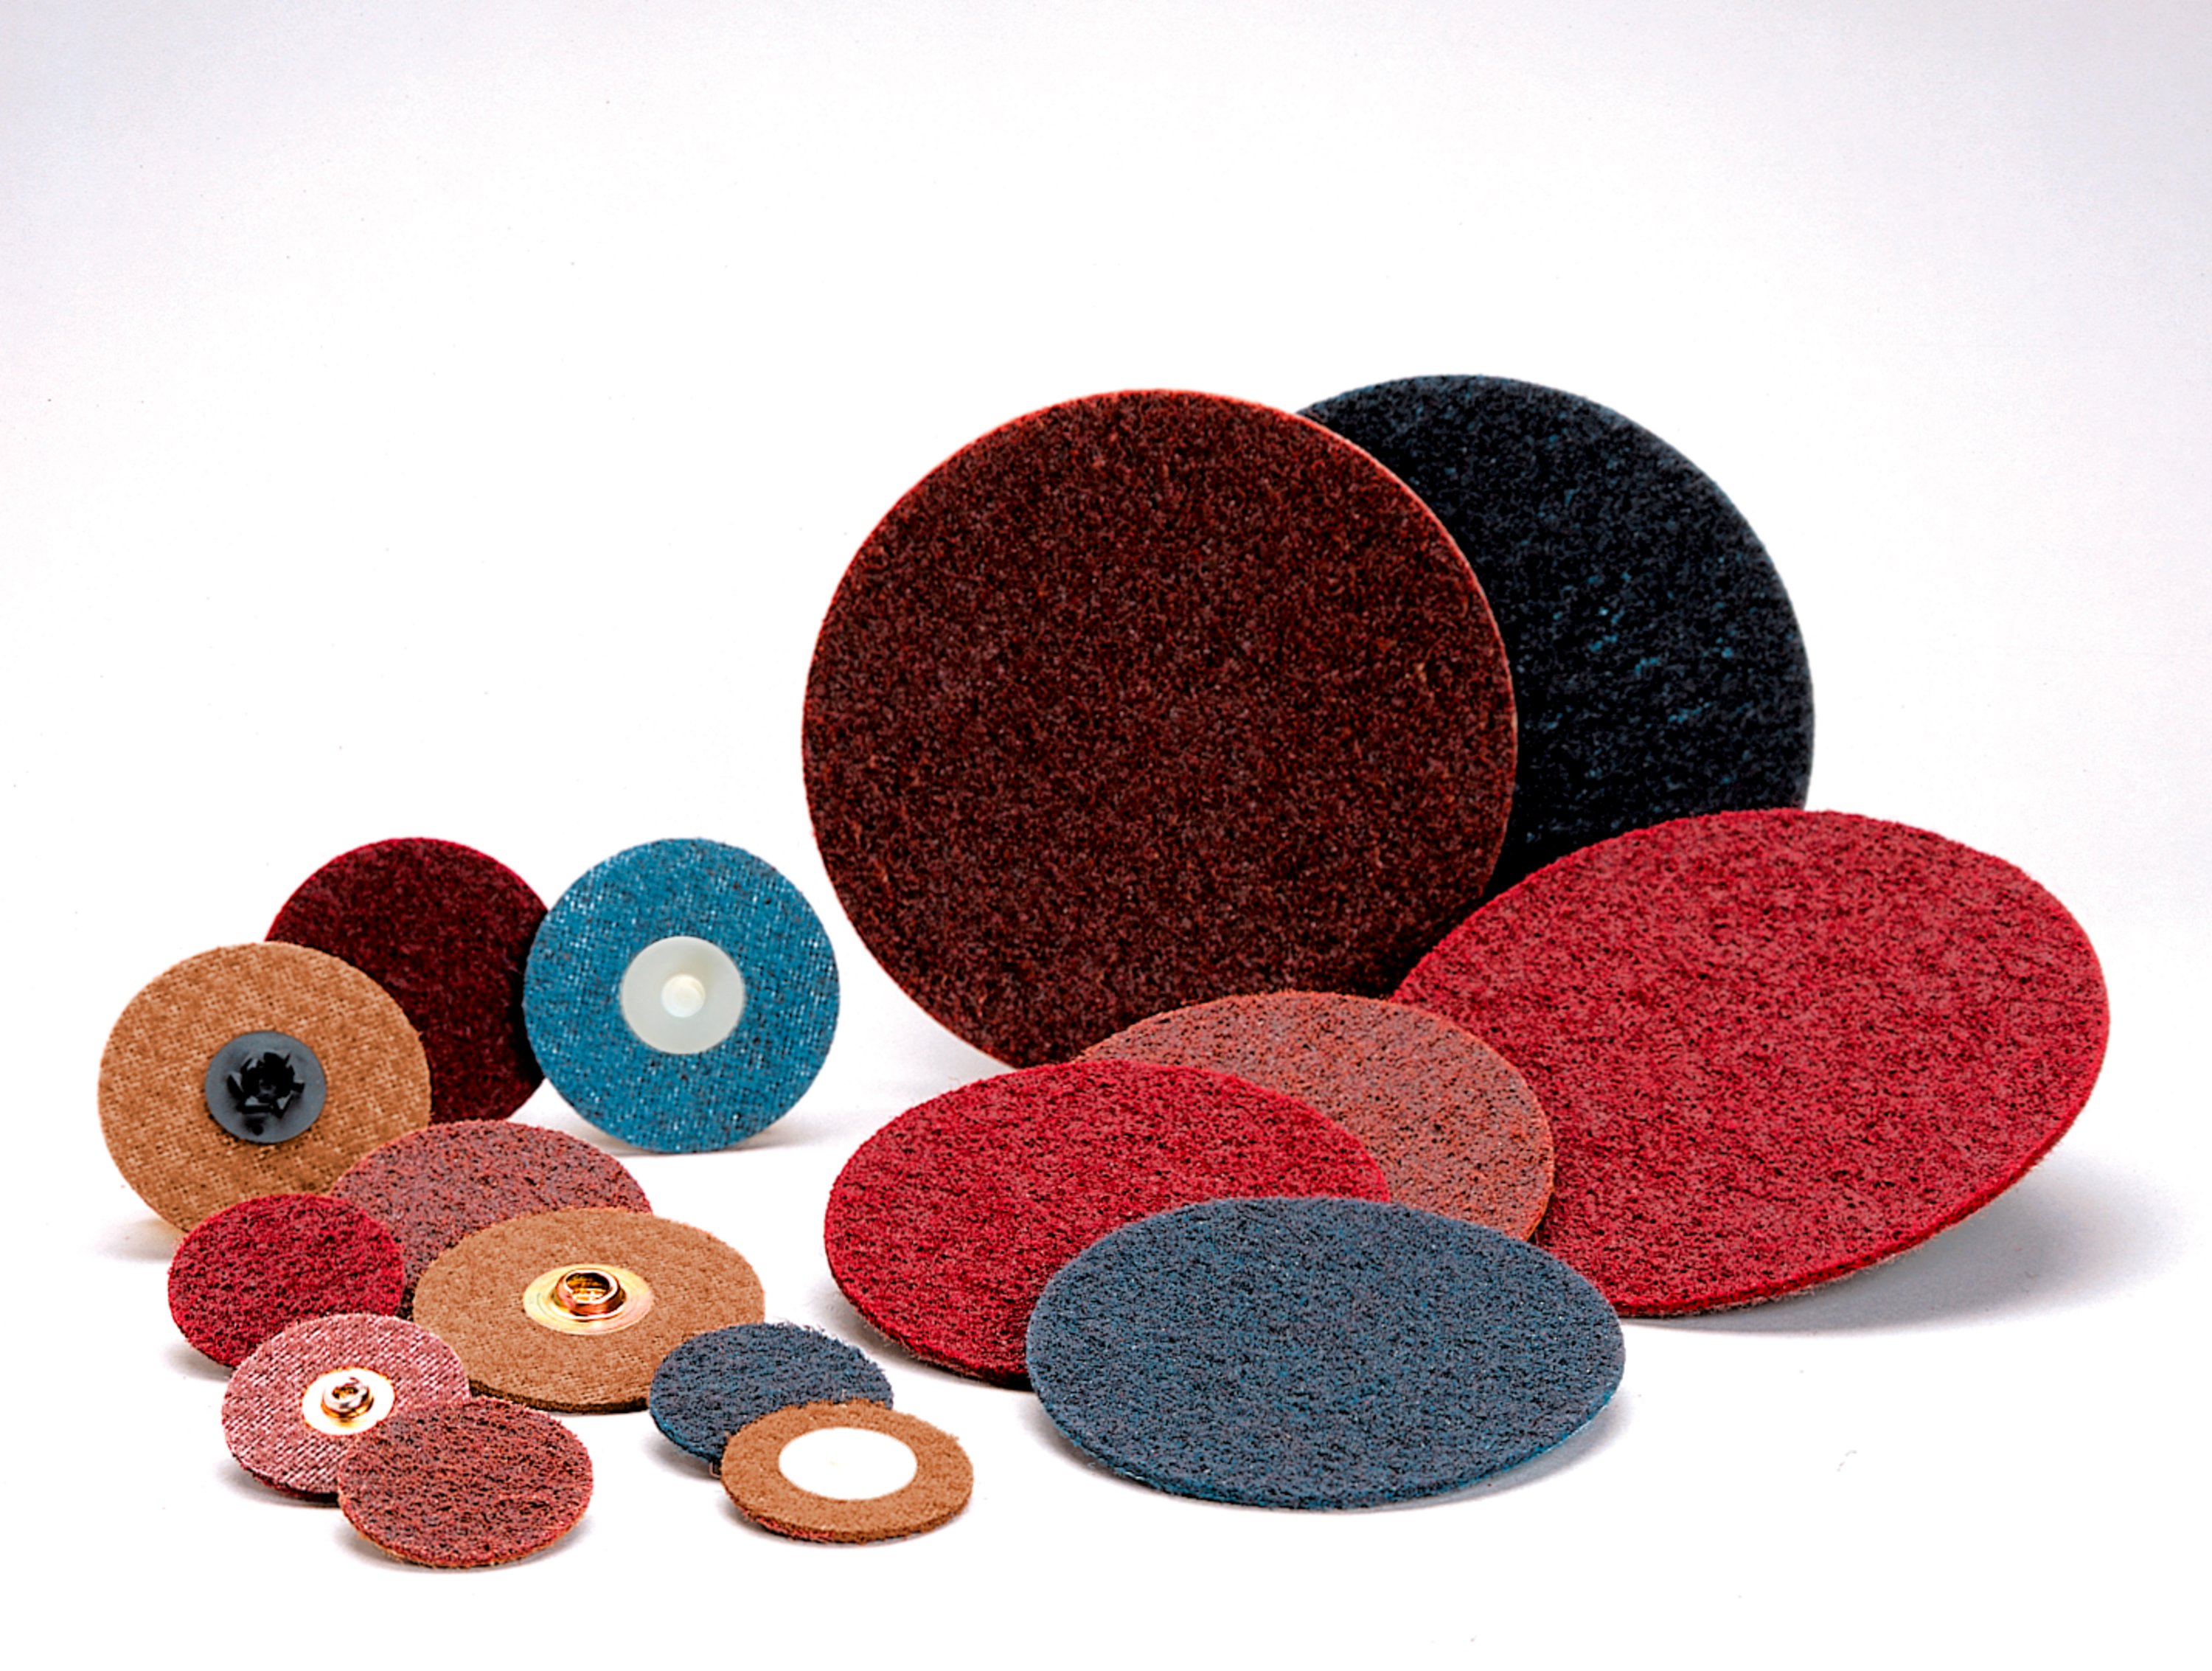 Multi-purpose abrasive works well on ferrous and non-ferrous metals and composites, particularly on flat surfaces